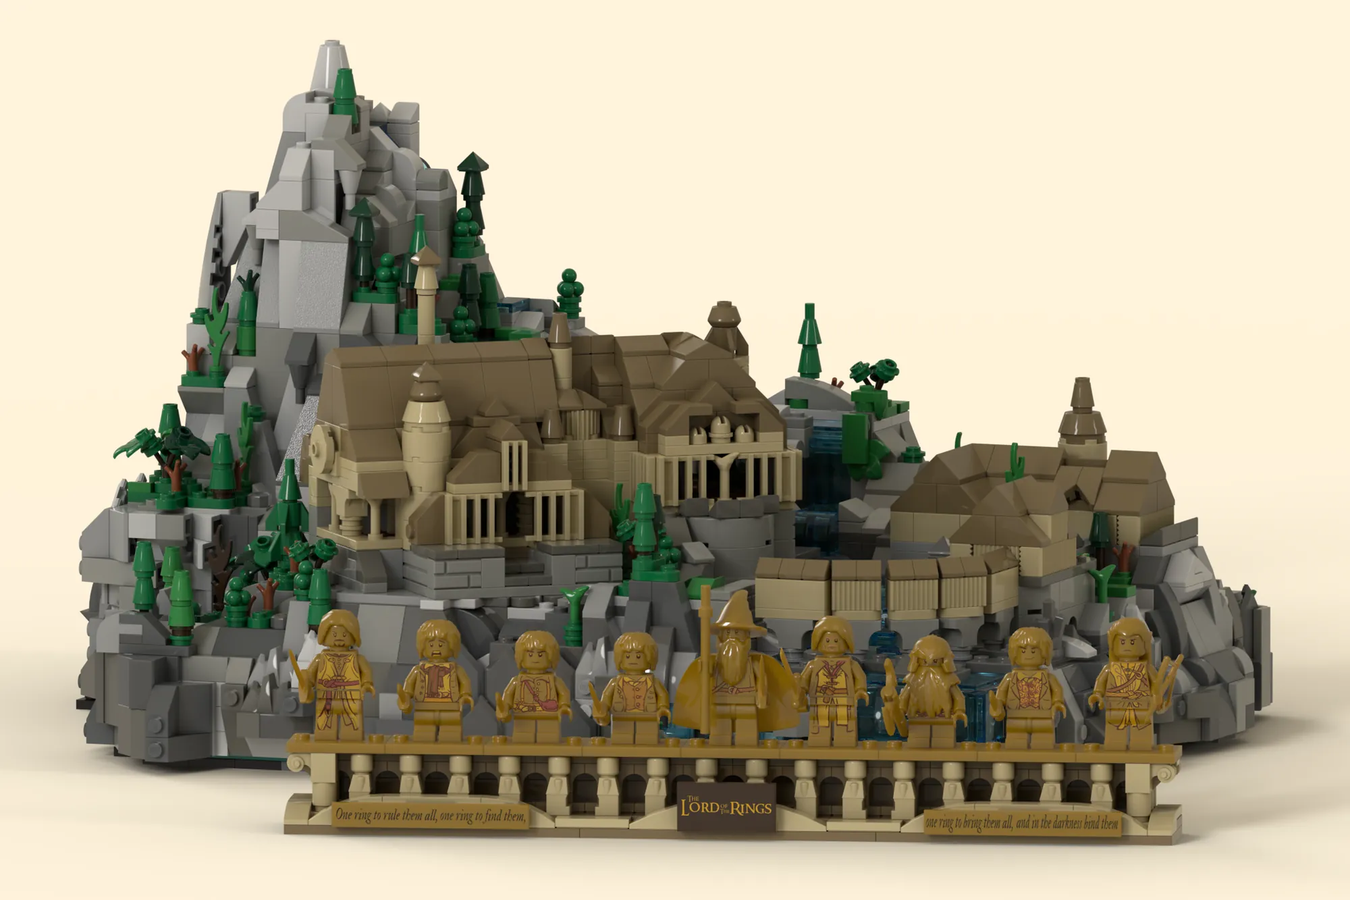 LEGO IDEAS - Lord of the Rings: Micro Scale Minas Tirith